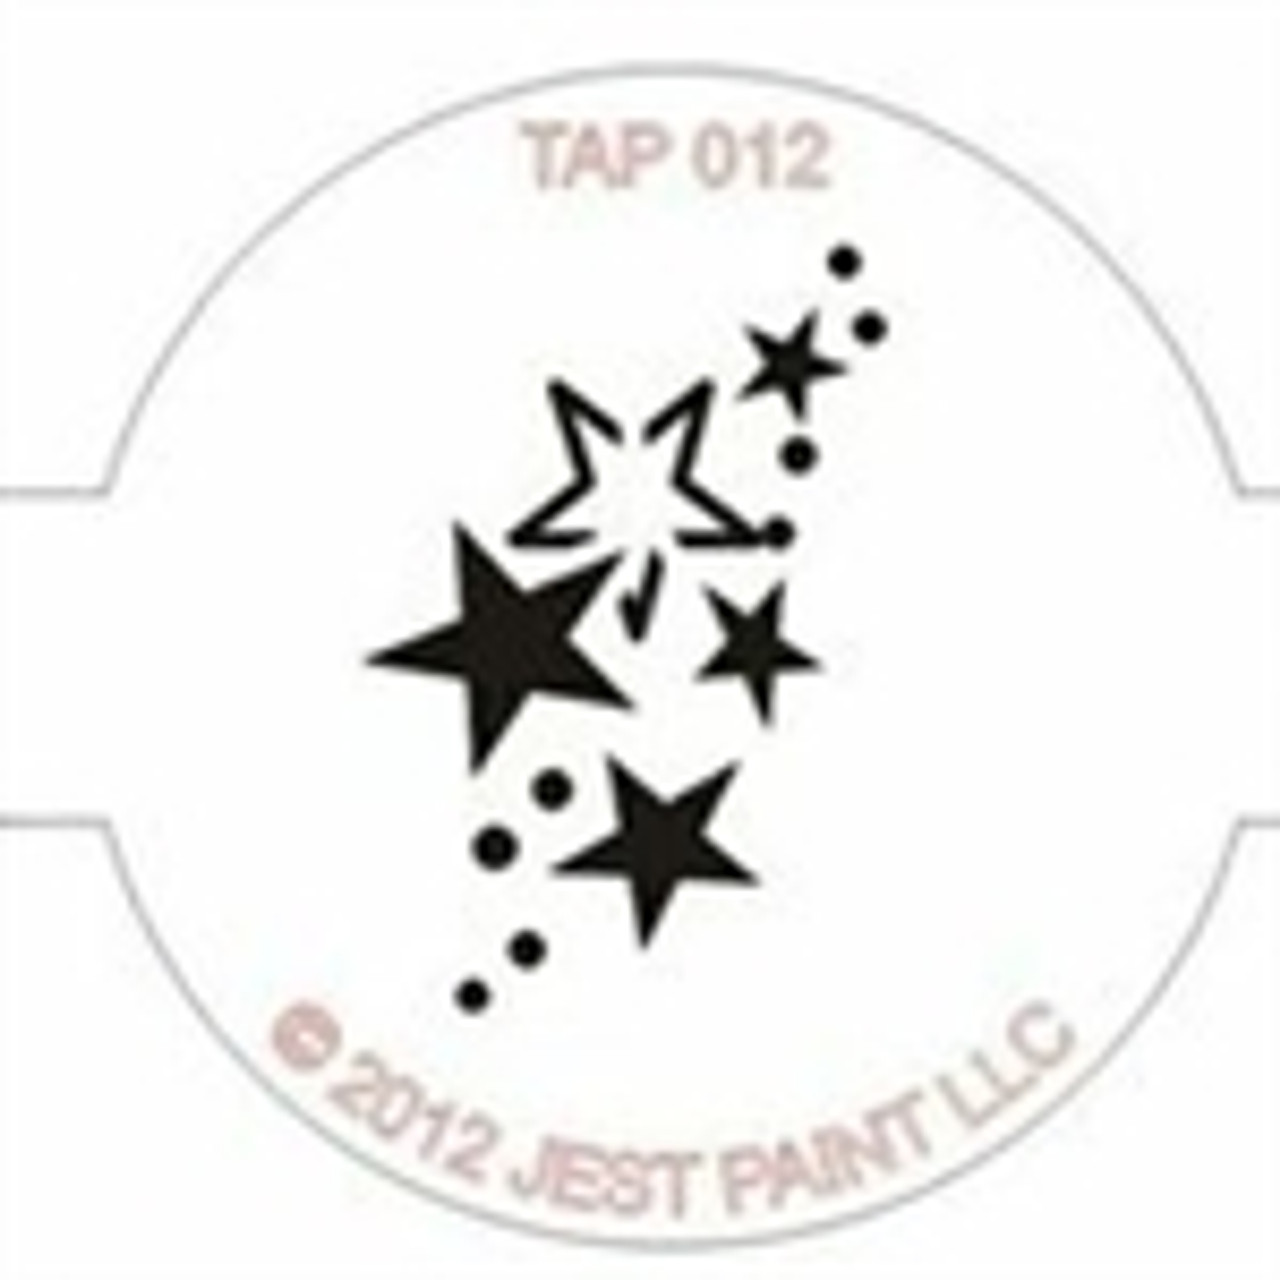 Tap 032 Face Painting Stencil - Shooting Star